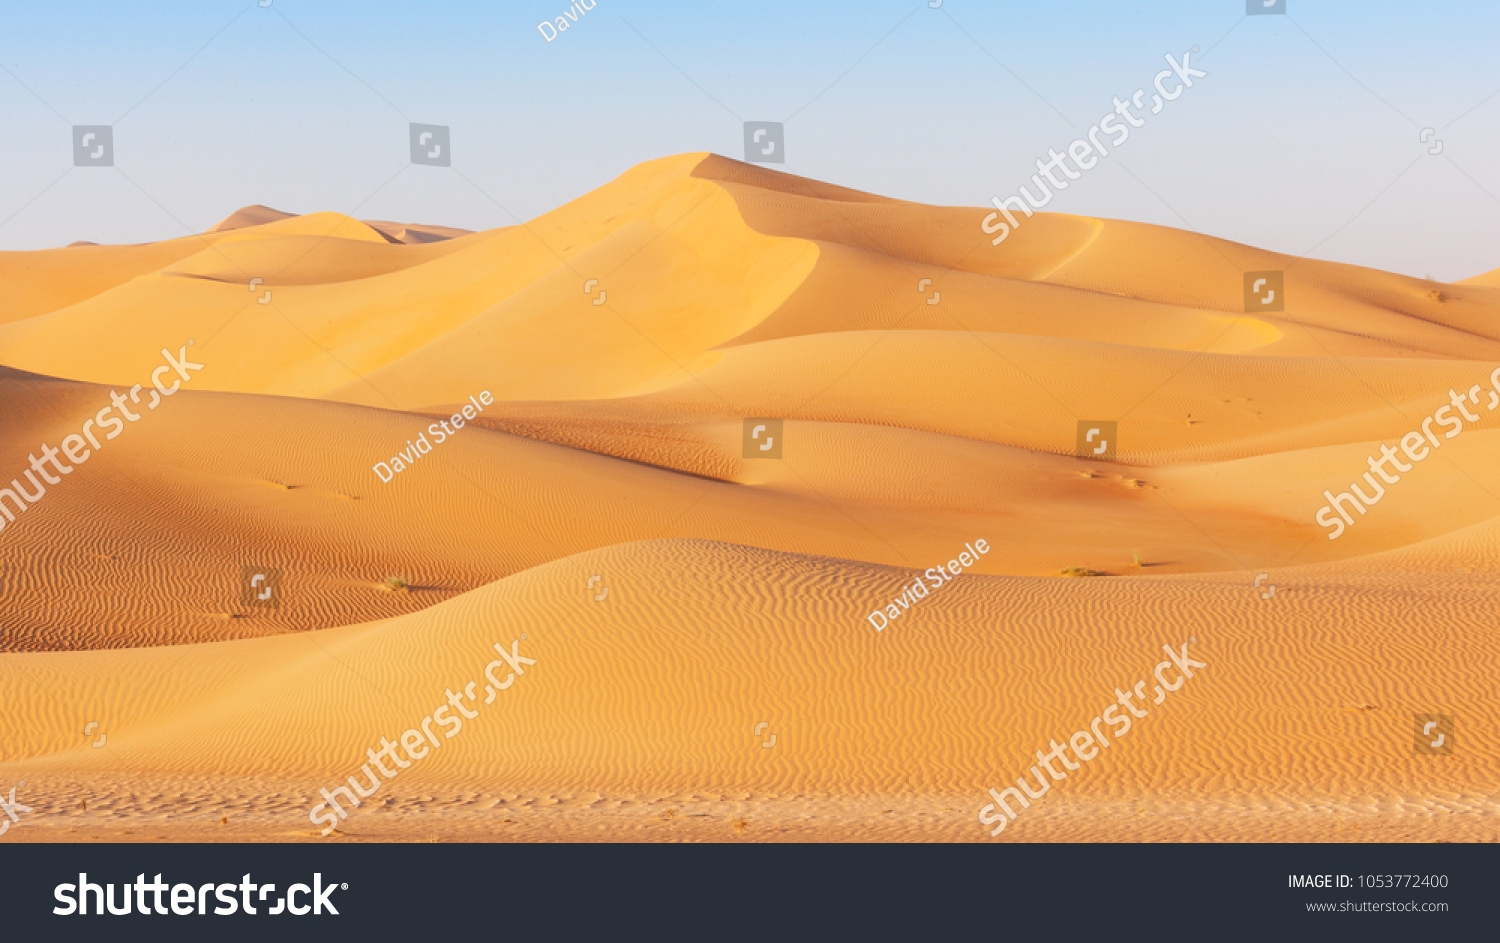 A dune landscape in the Rub al Khali or Empty Quarter. Straddling Oman, Saudi Arabia, the UAE and Yemen, this is the largest sand desert in the world. #1053772400